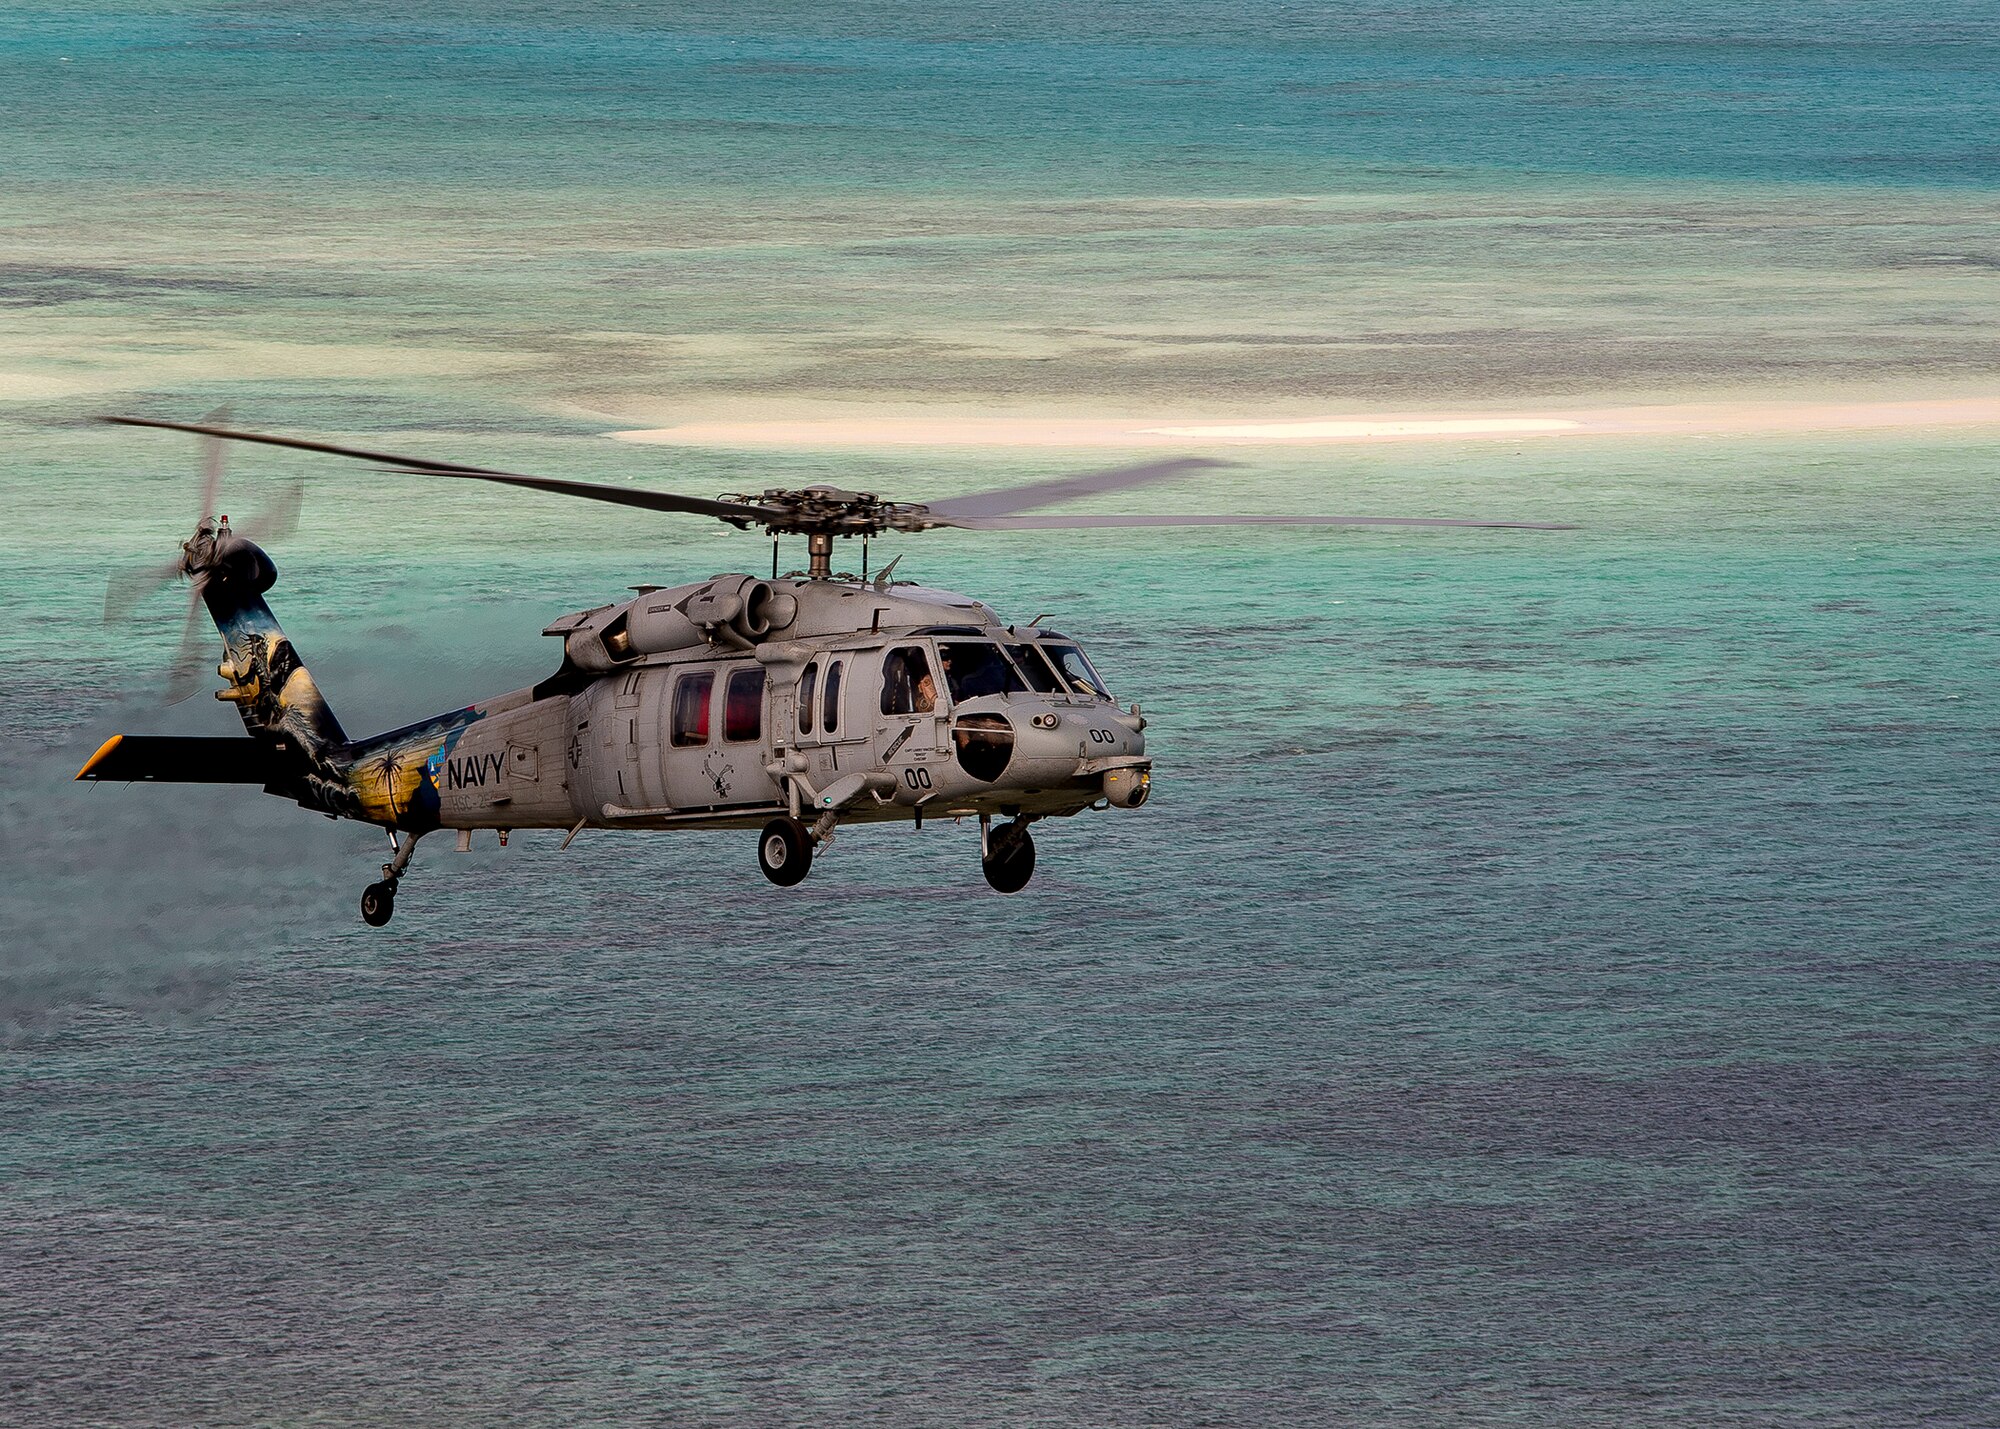 An MH-60S Sea Hawk helicopter assigned to the Island Knights of Helicopter Sea Combat Squadron (HSC) 25 is pictured during a photo exercise off the coast of Guam. HSC-25 maintains a 24-hour search and rescue and medical evacuation alert posture, directly supporting the U.S. Coast Guard, Sector Guam and Joint Region Marianas. HSC-25 ensures maritime peace and security in the U.S. 7th Fleet area of responsibility. (U.S. Navy photo by Chief Mass Communication Specialist Joan E. Jennings/Released) 